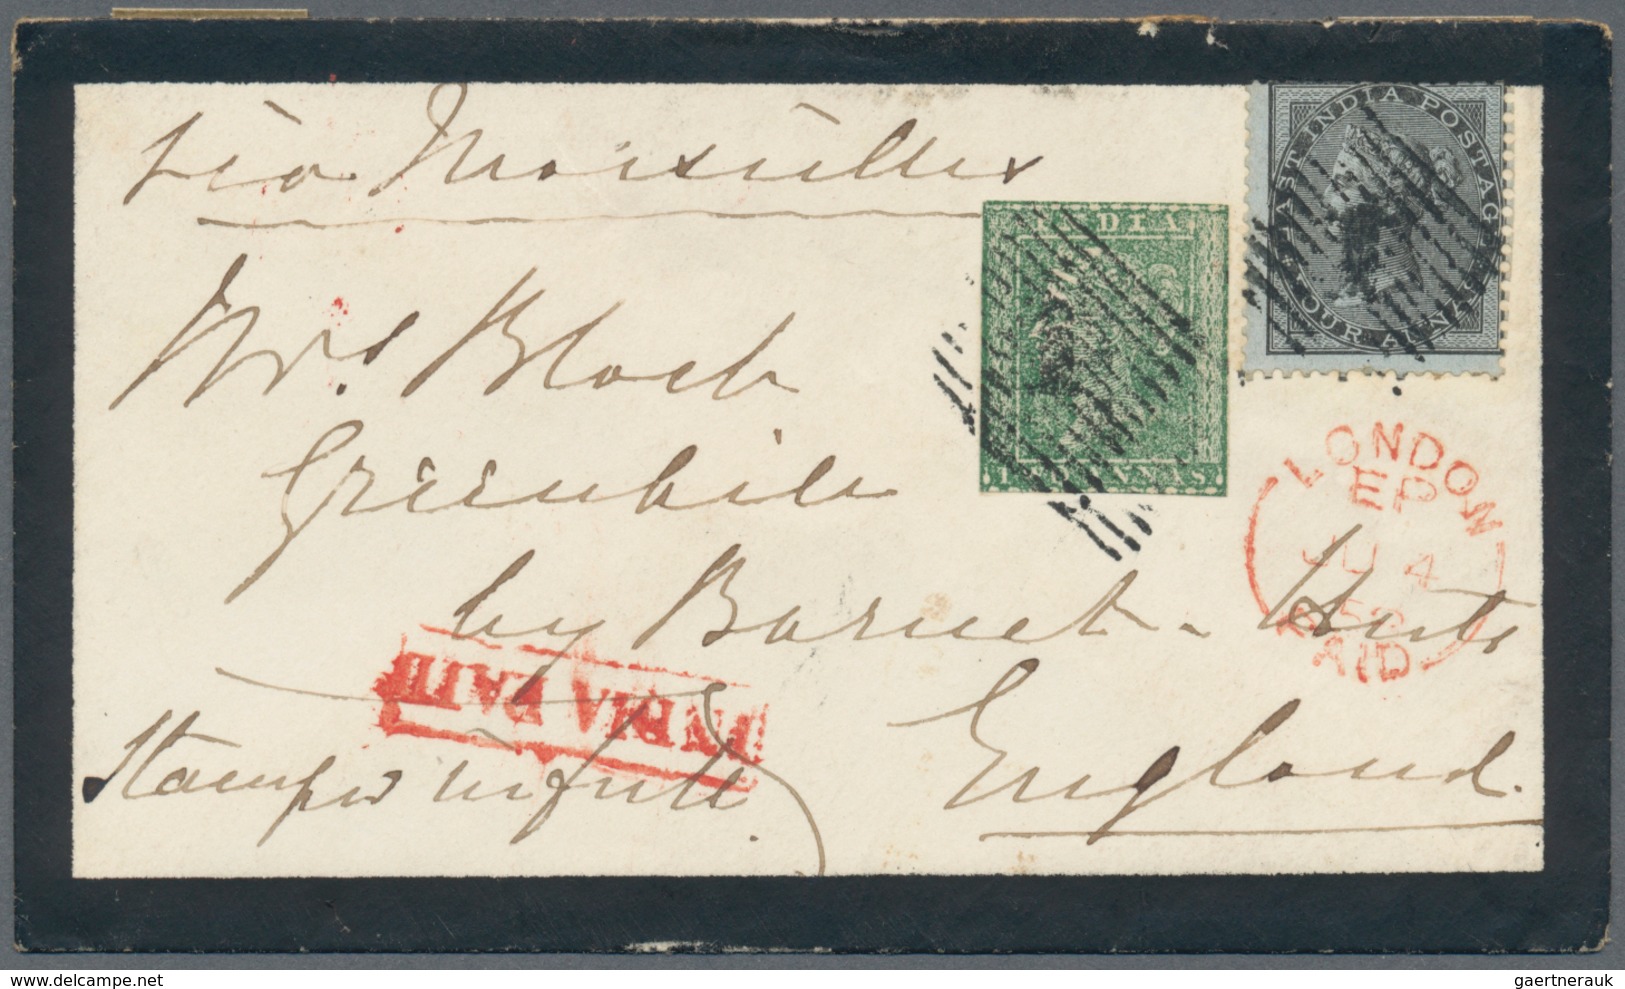 Indien: 1858 (6 May): Mourning Cover From Bombay To England Via Marseilles Franked By 1854 2a. Green - 1852 Sind Province